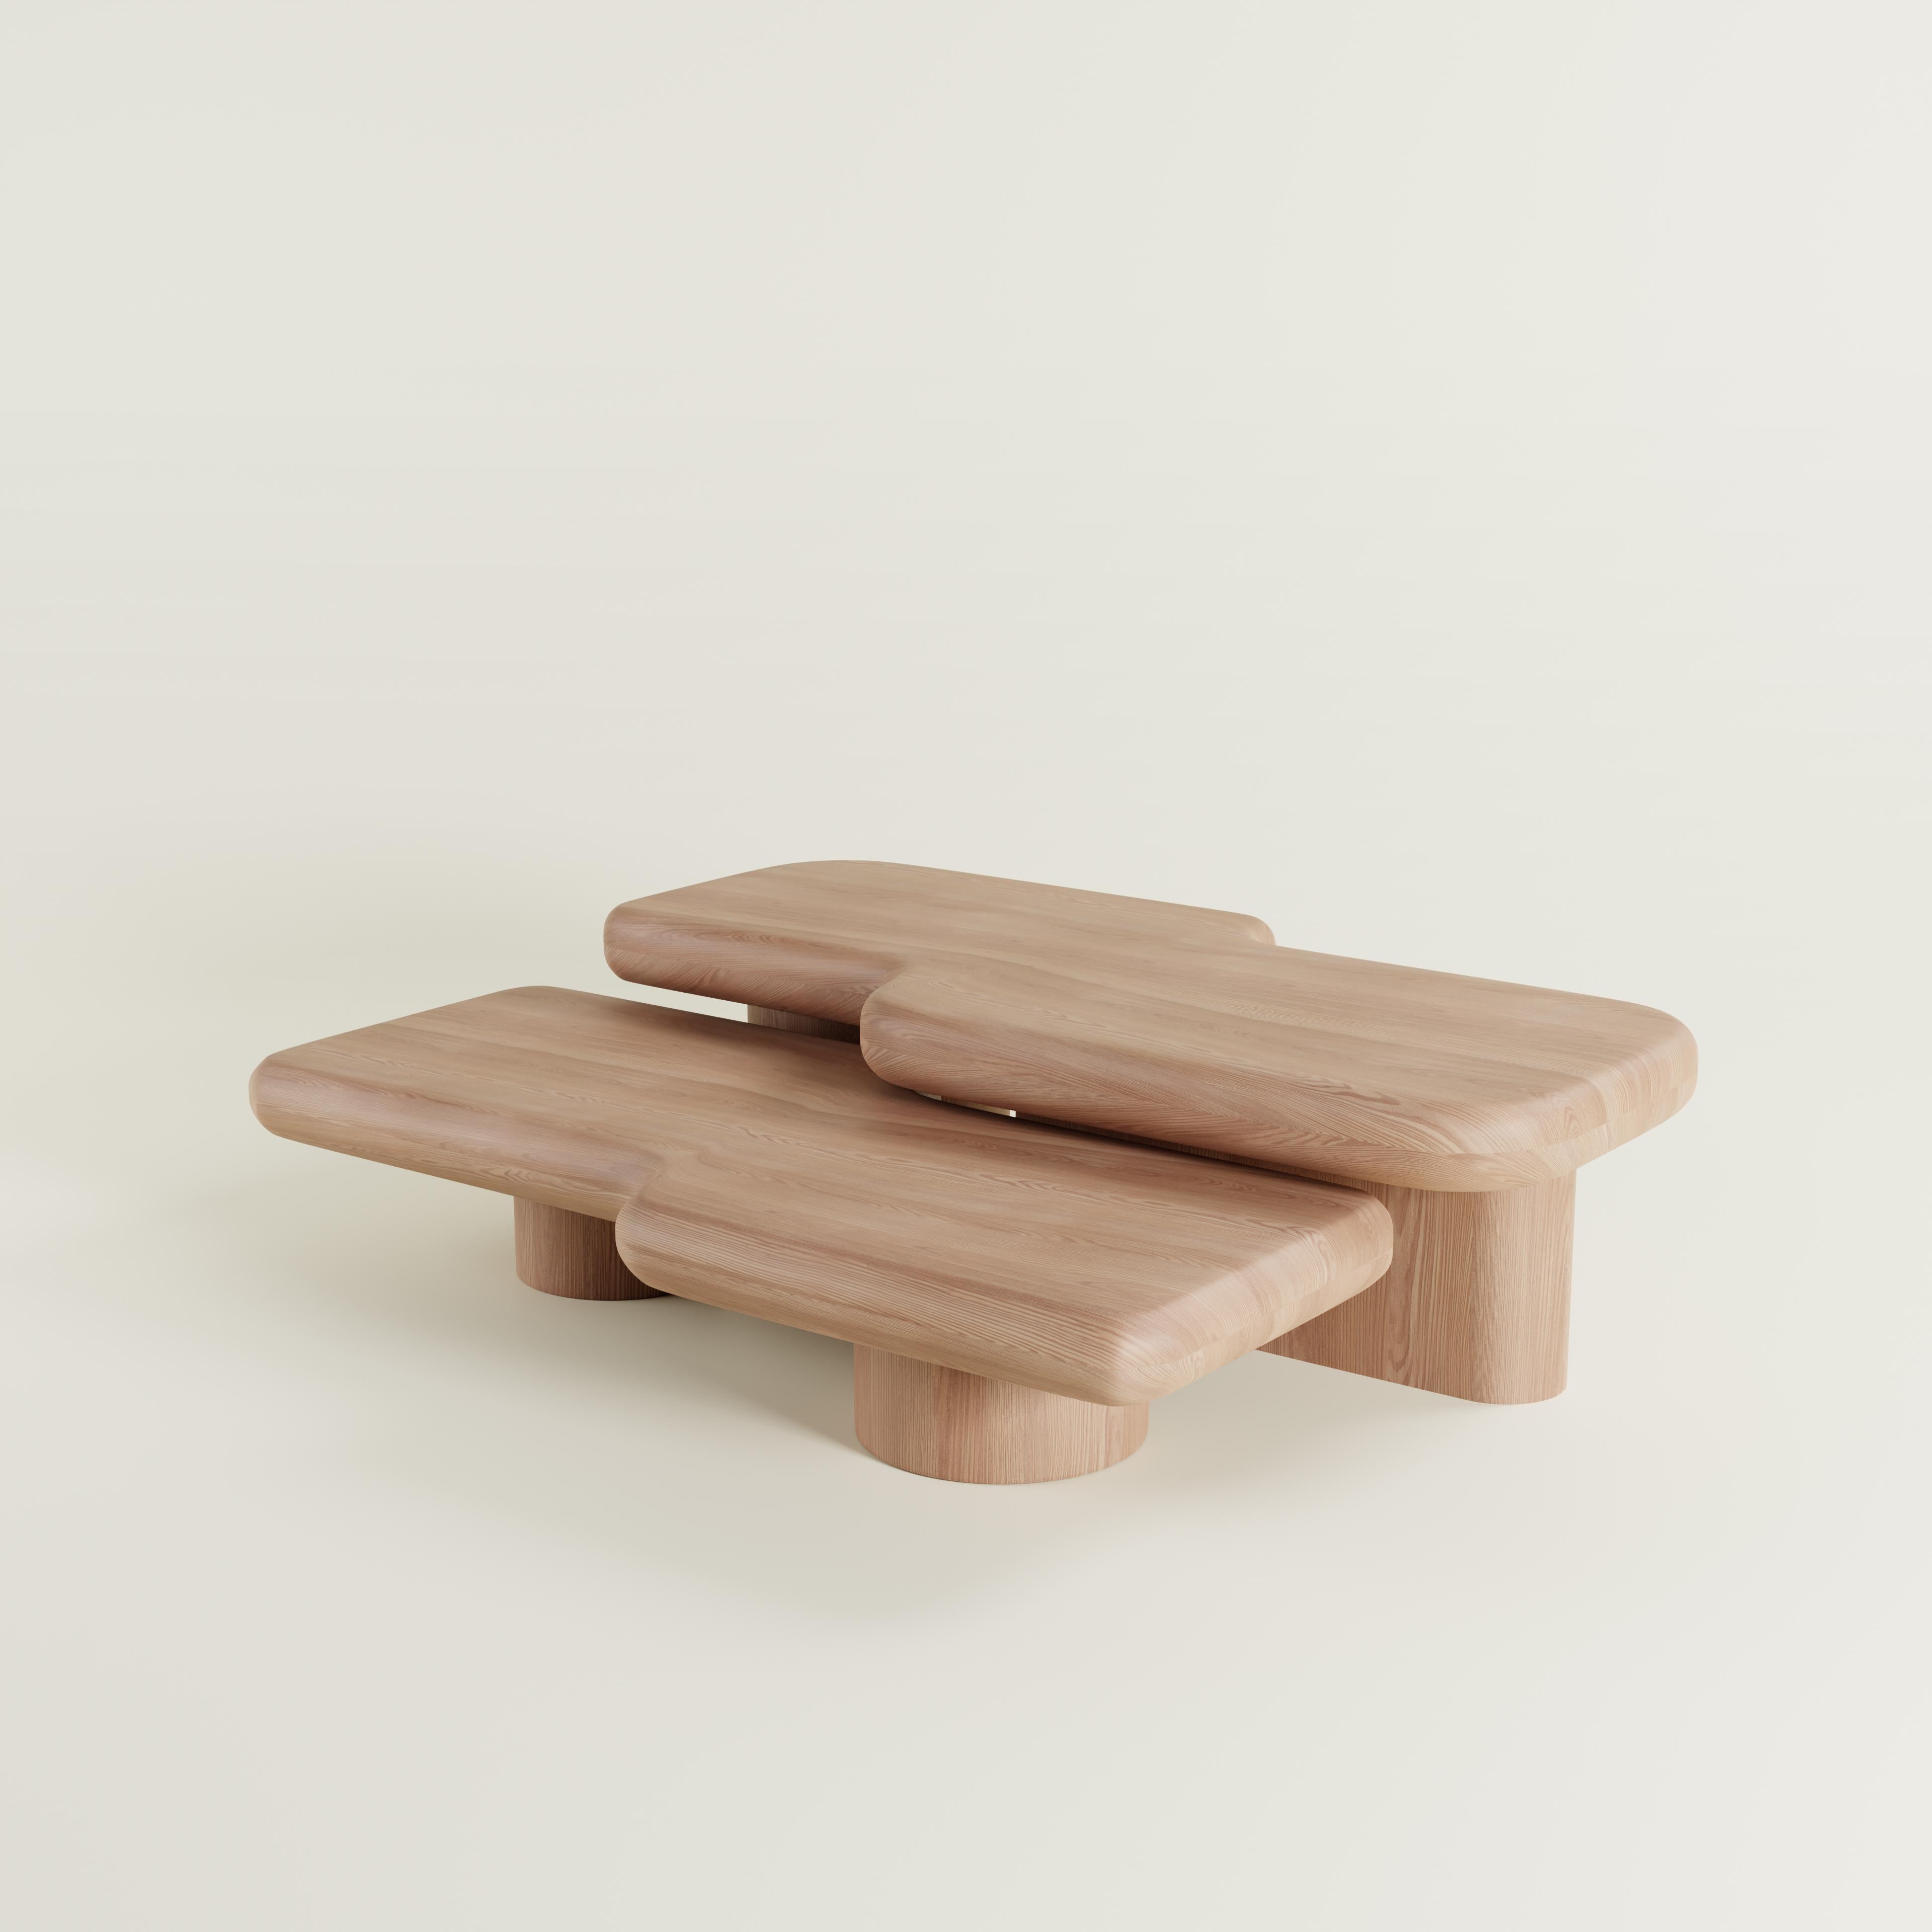 For this collection in collaboration with Rio Estudio, inspiration is drawn from hydraulic circuits; systems that transport some liquid component, comprised of long and linear elements, articulated by bends. 

The Circuit Oak Coffee Table Set